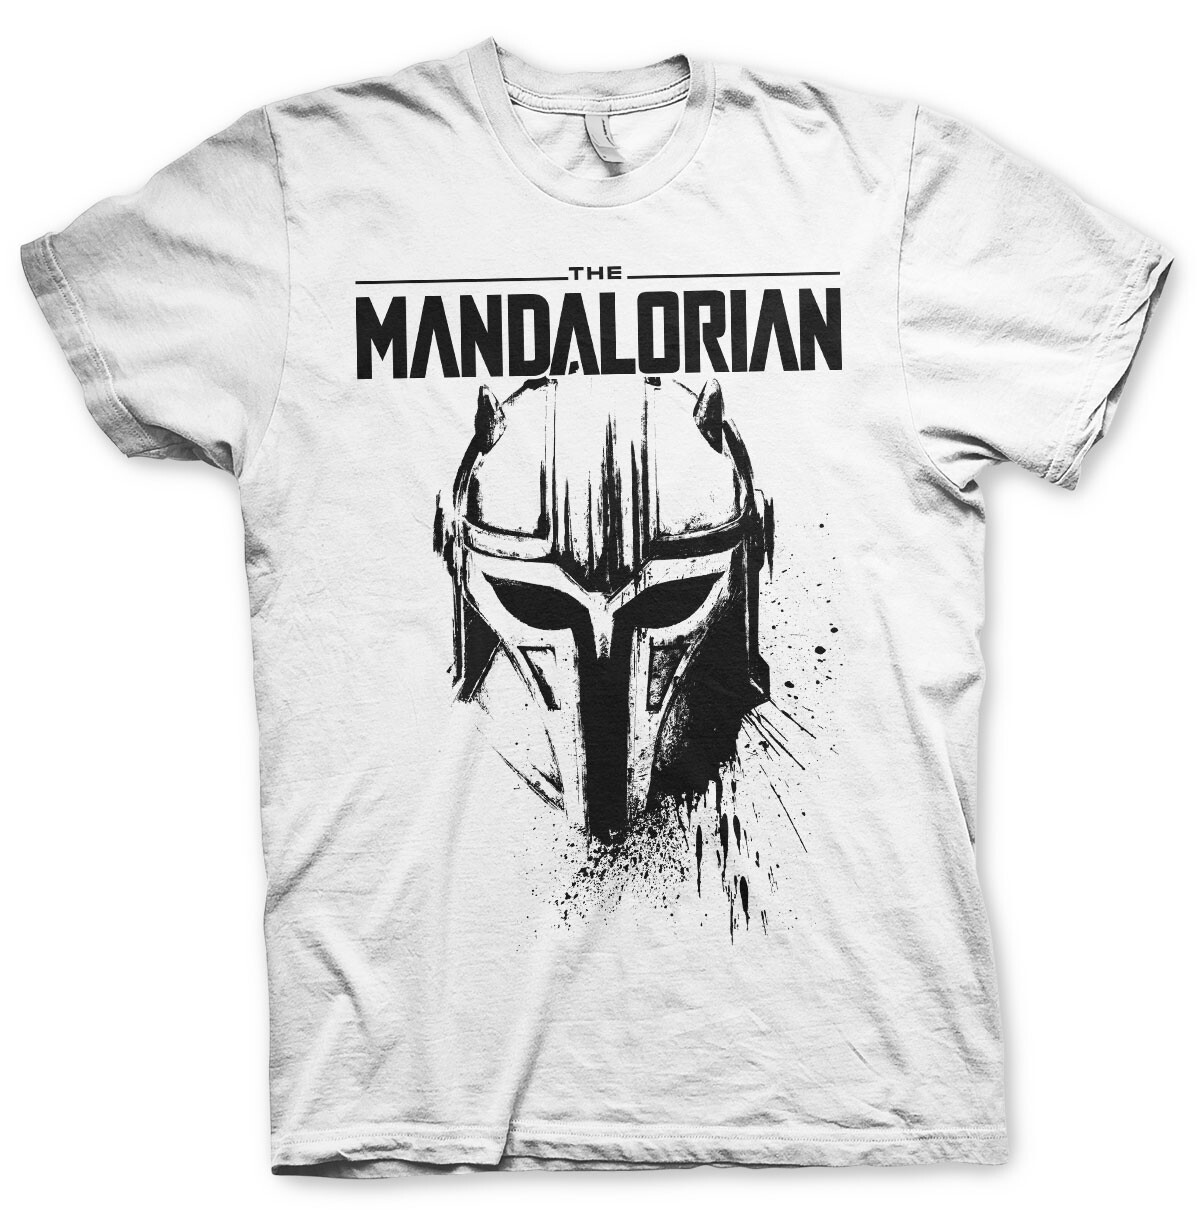 Star Wars: The Mandalorian | Clothes and accessories for merchandise fans